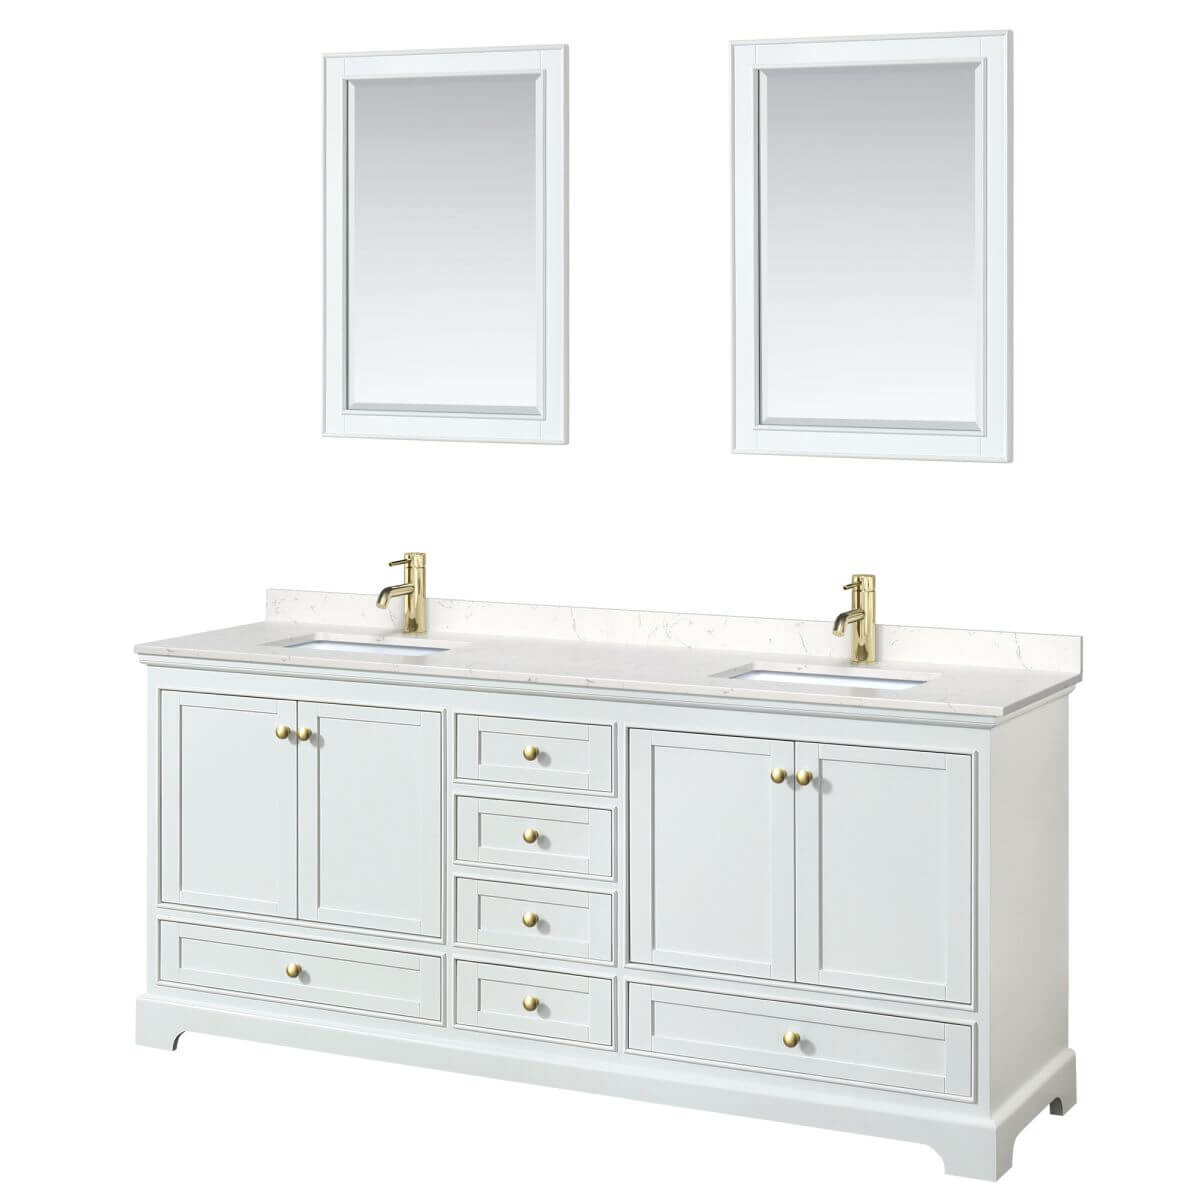 Wyndham Collection Deborah 80 inch Double Bathroom Vanity in White with Carrara Cultured Marble Countertop, Undermount Square Sinks, Brushed Gold Trim and 24 inch Mirrors - WCS202080DWGC2UNSM24